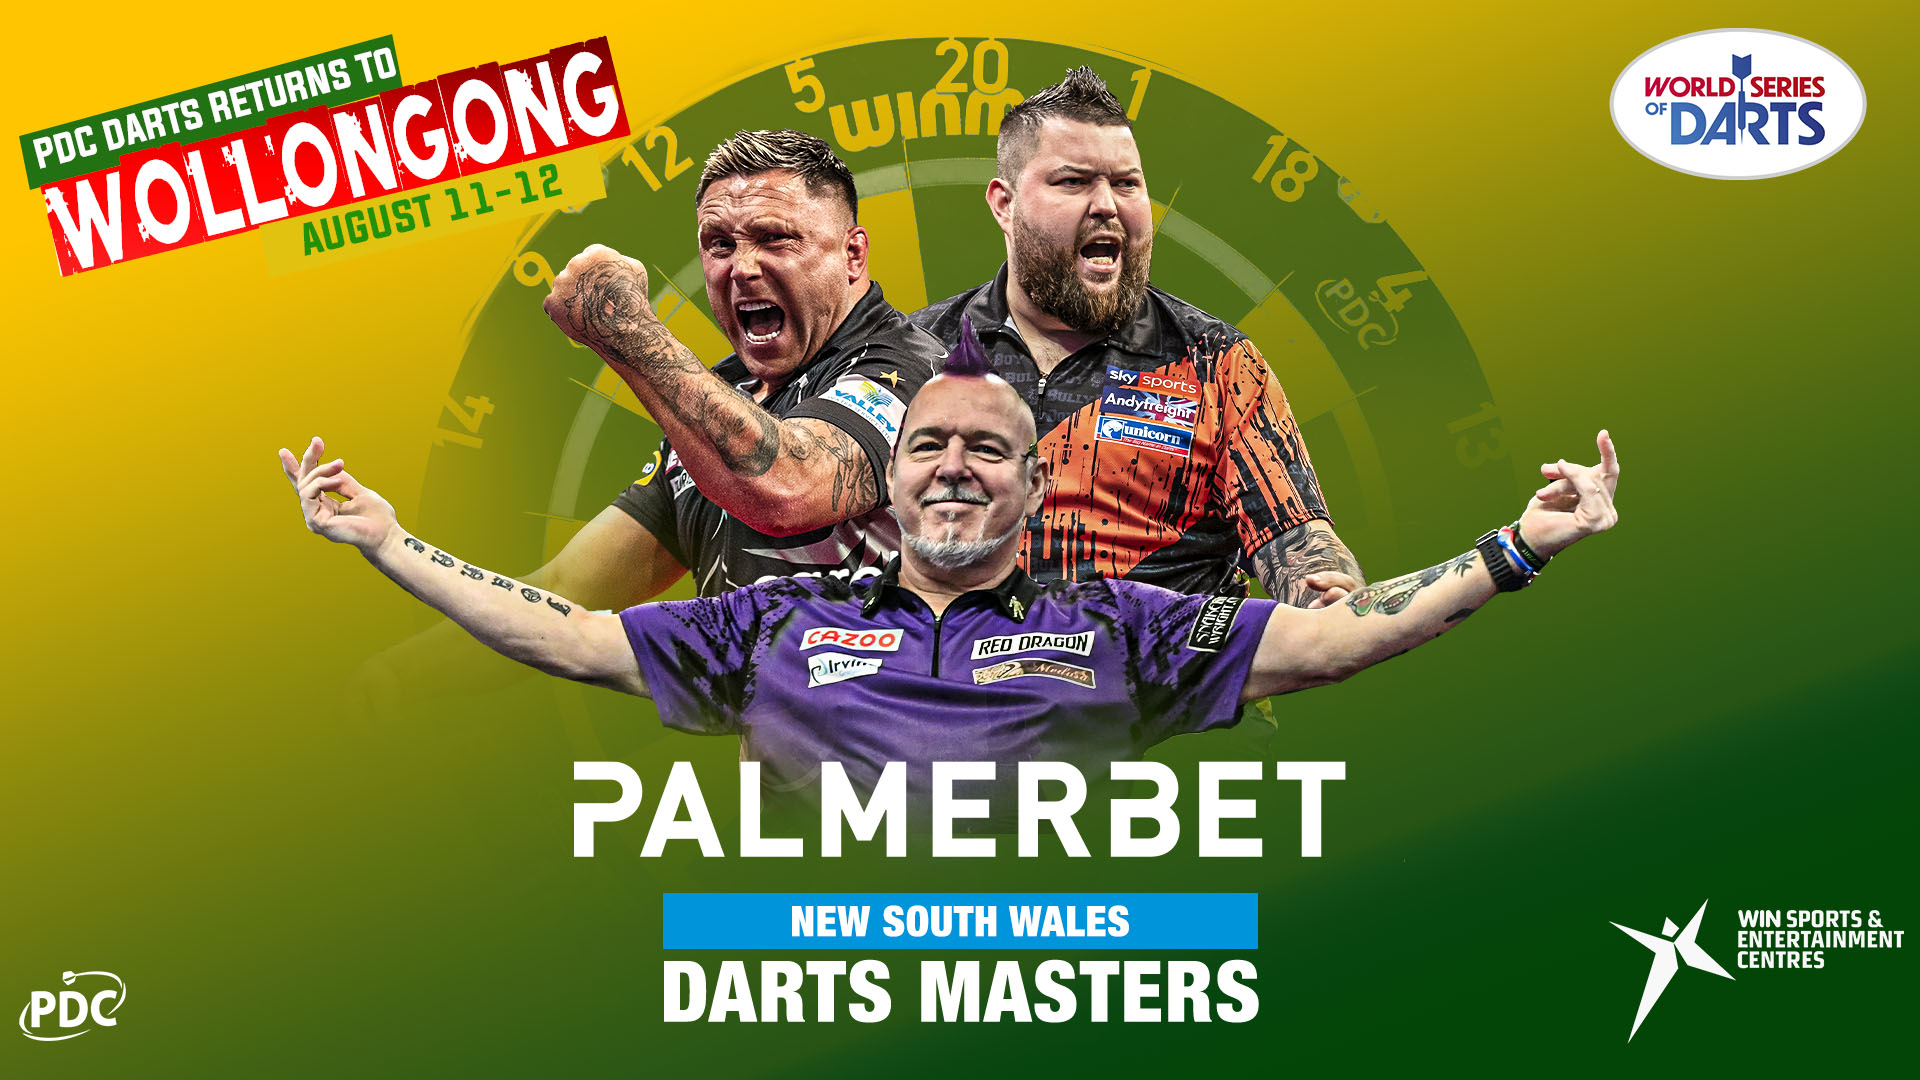 Palmerbet to sponsor 2023 New South Wales Darts Masters PDC